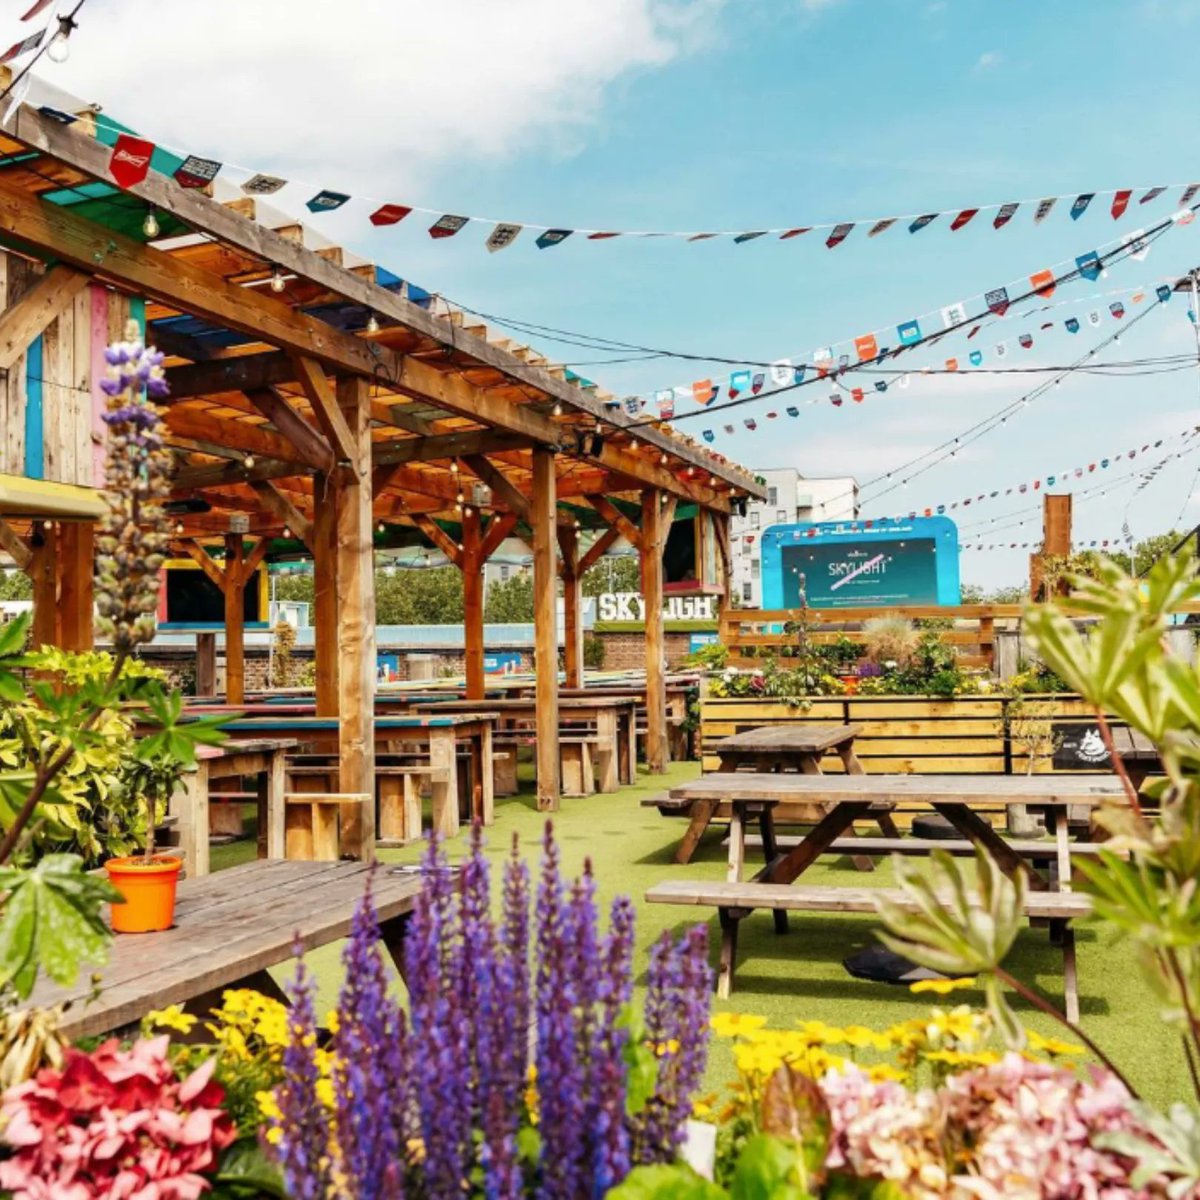 With panoramic views of London and boasting big outdoor spaces, both of Skylight's venues are great event spaces for the Summer! We are excited to announce that @skylight_london will be onboard at our upcoming Show! Catch the team on stand A4 at the London Summer Event Show!